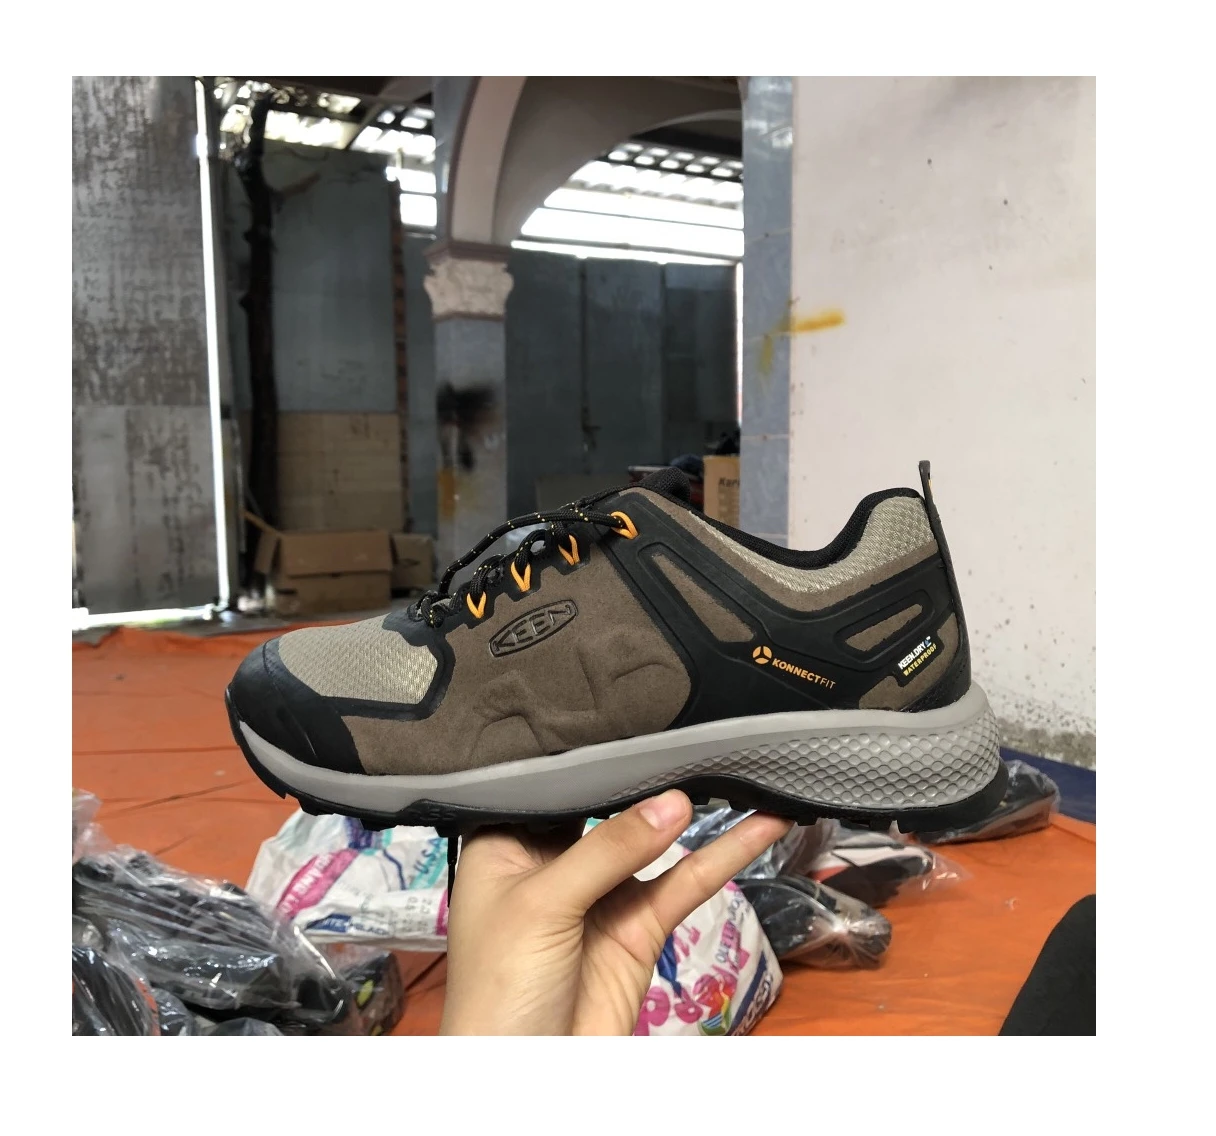 overstock shoes wholesale